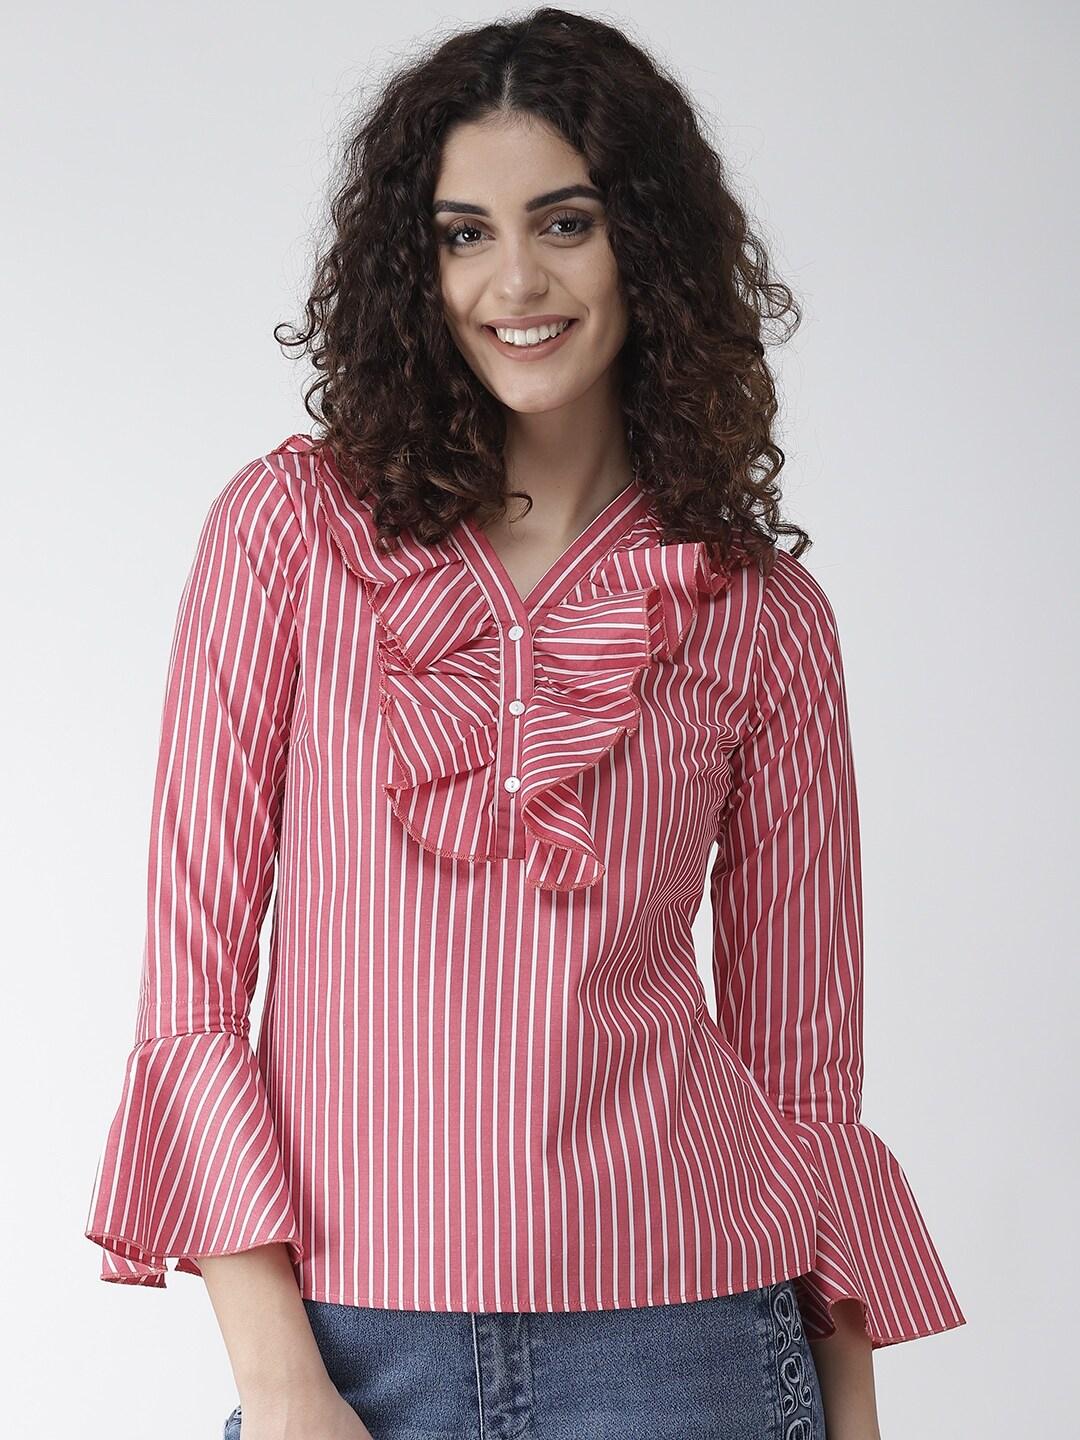 style-quotient-women-red-&-white-striped-top